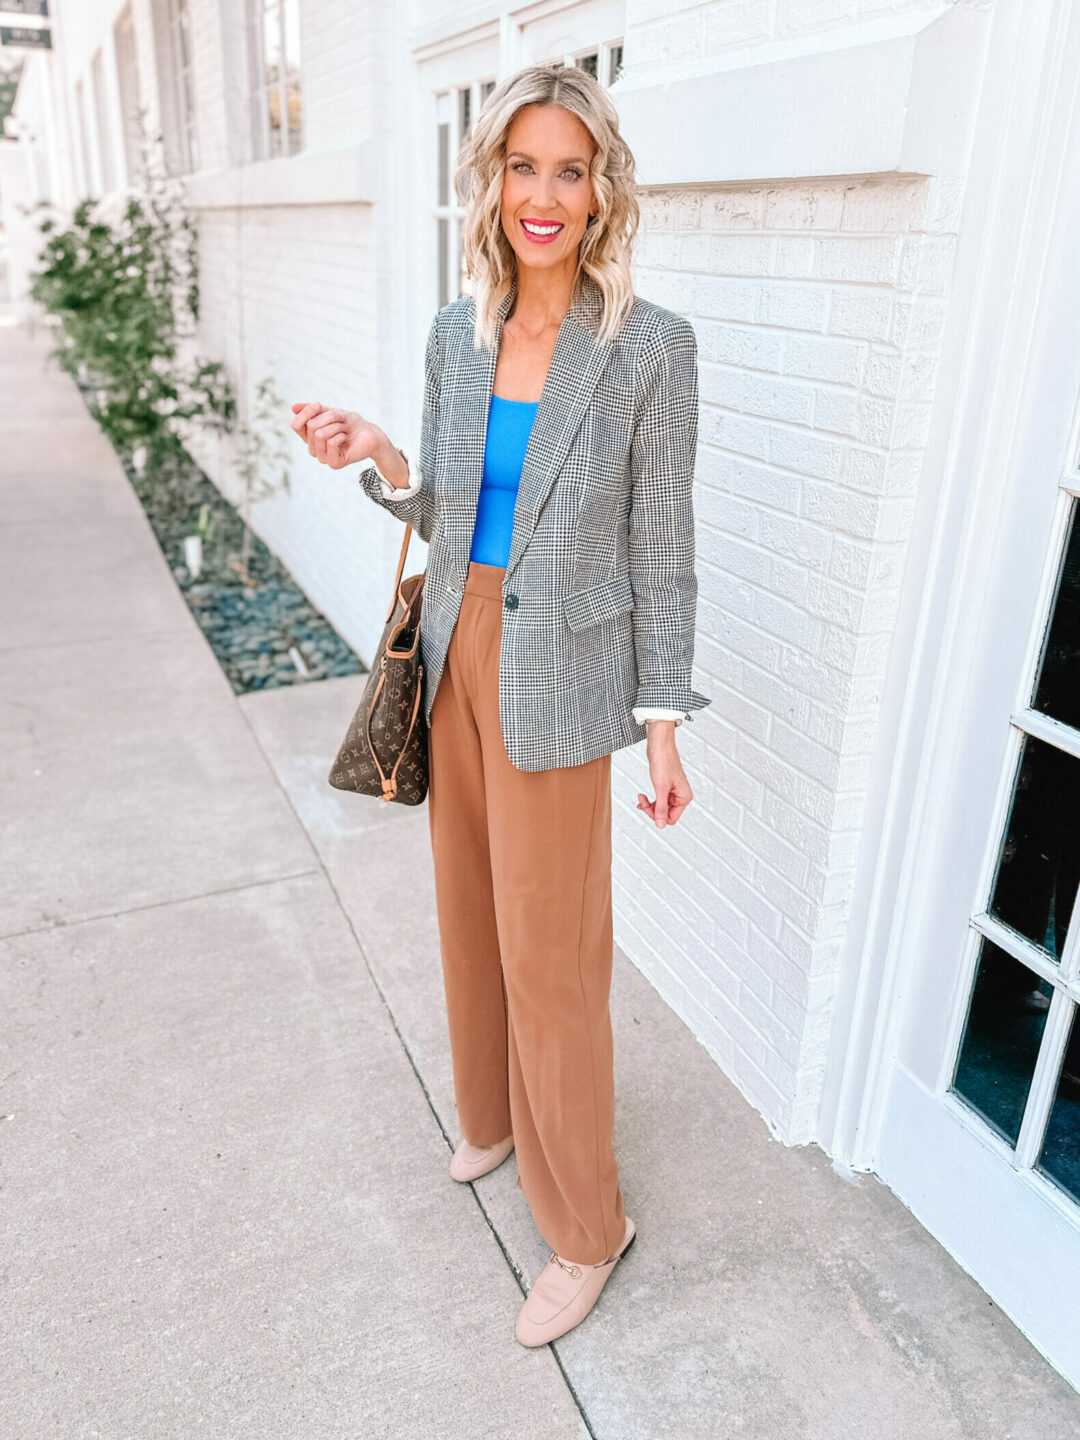 Wide Leg Pant Fall Work Outfit Idea - Straight A Style